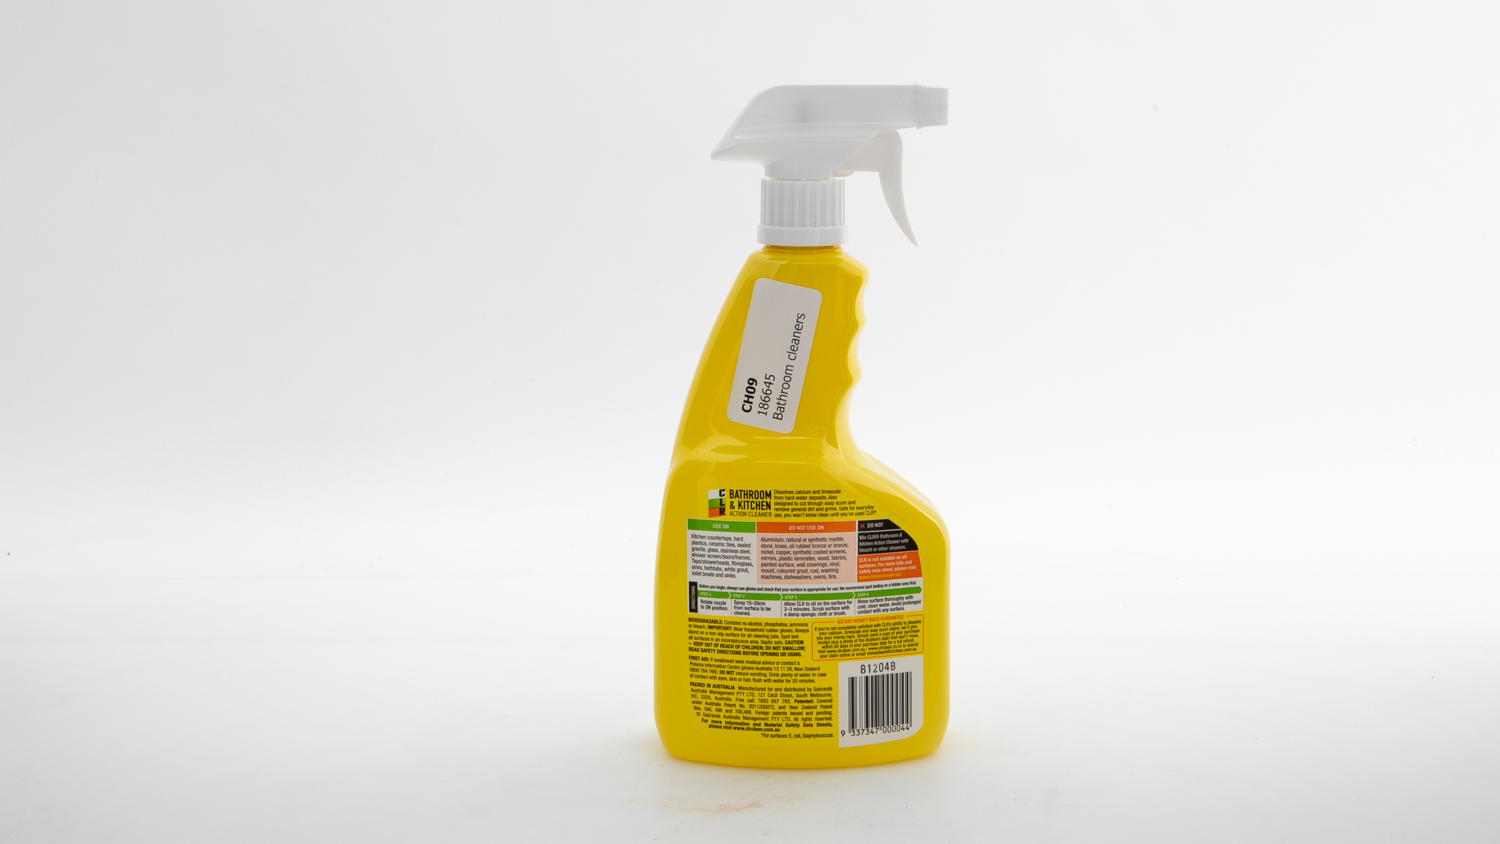 clr bath and kitchen cleaner instructions